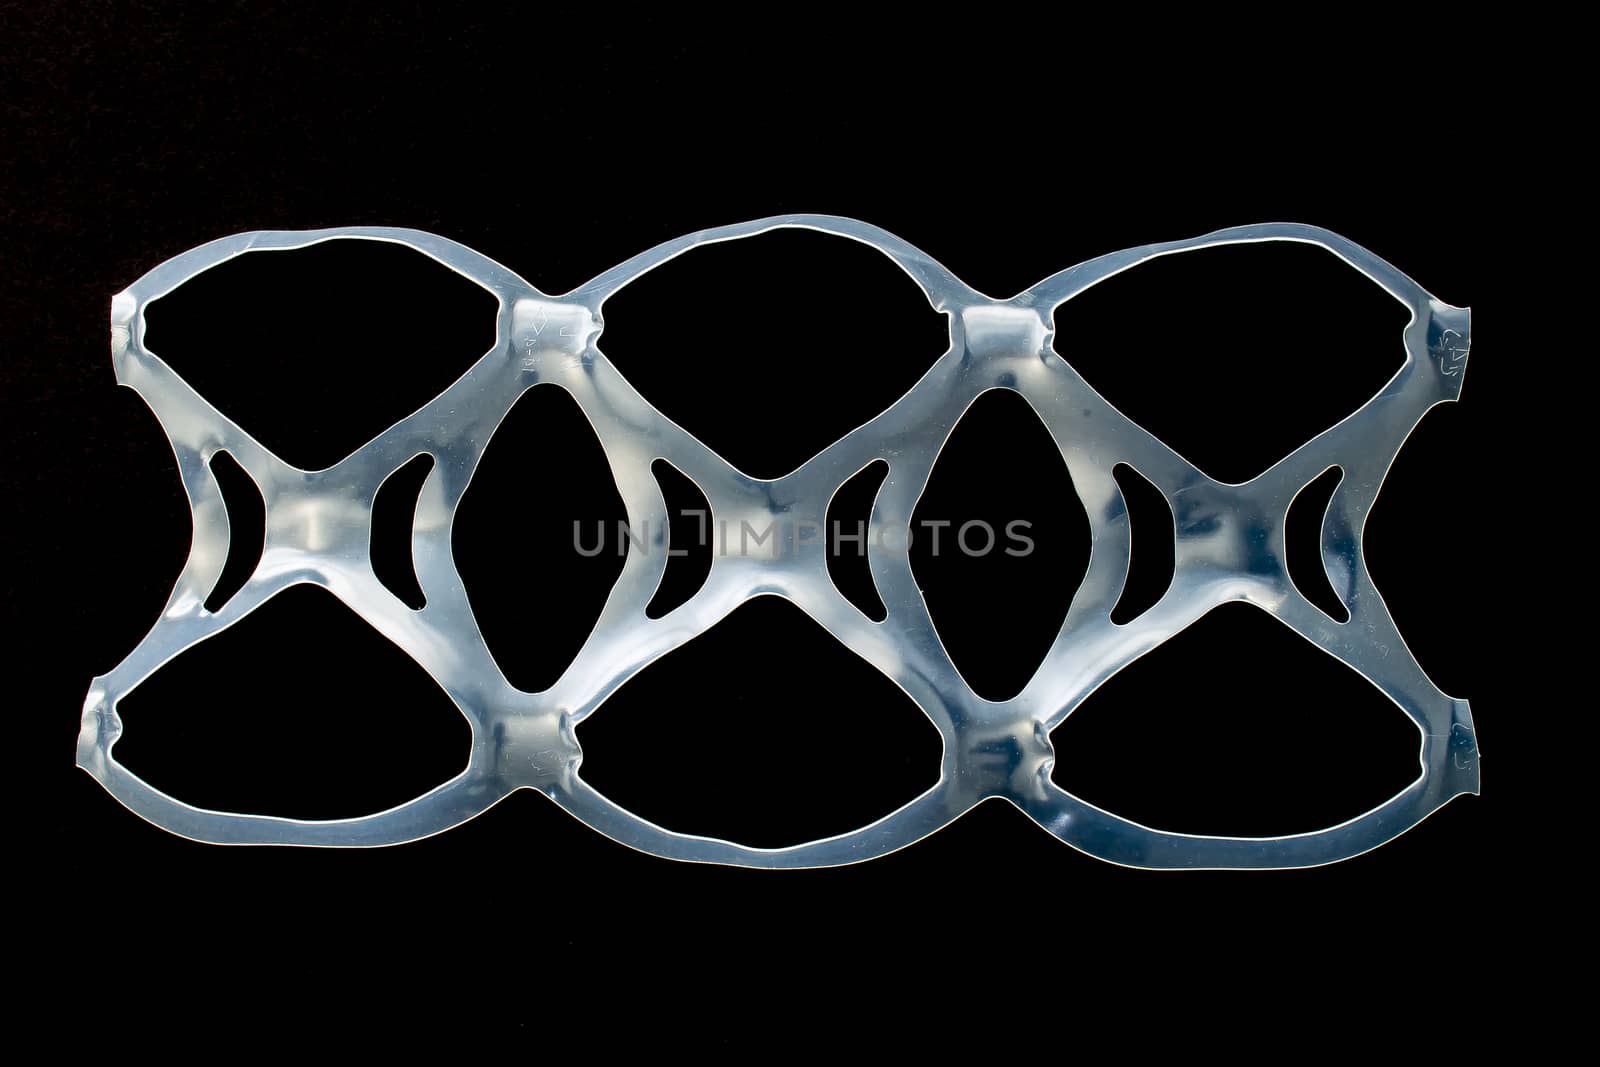 Isolated six pack rings or six pack yokes, connected plastic rings used in multi-packs of beverage on a black background